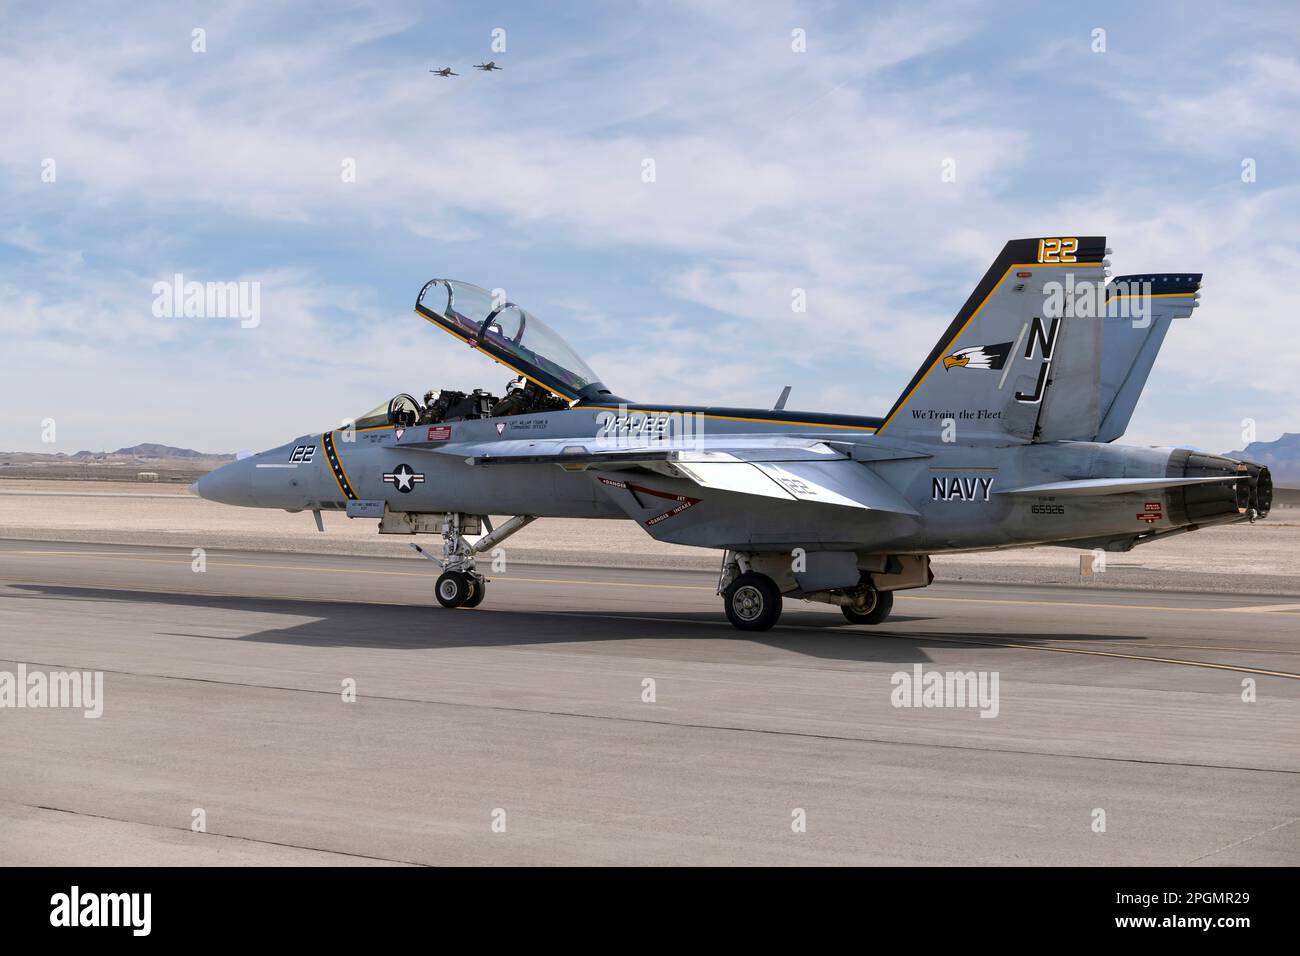 Las Vegas, NV - November 5, 2022: Navy F-18 Super Hornet Fighter Jet Does a Demonstration During the Aviation Nation Airshow at Nellis AFB. Stock Photo